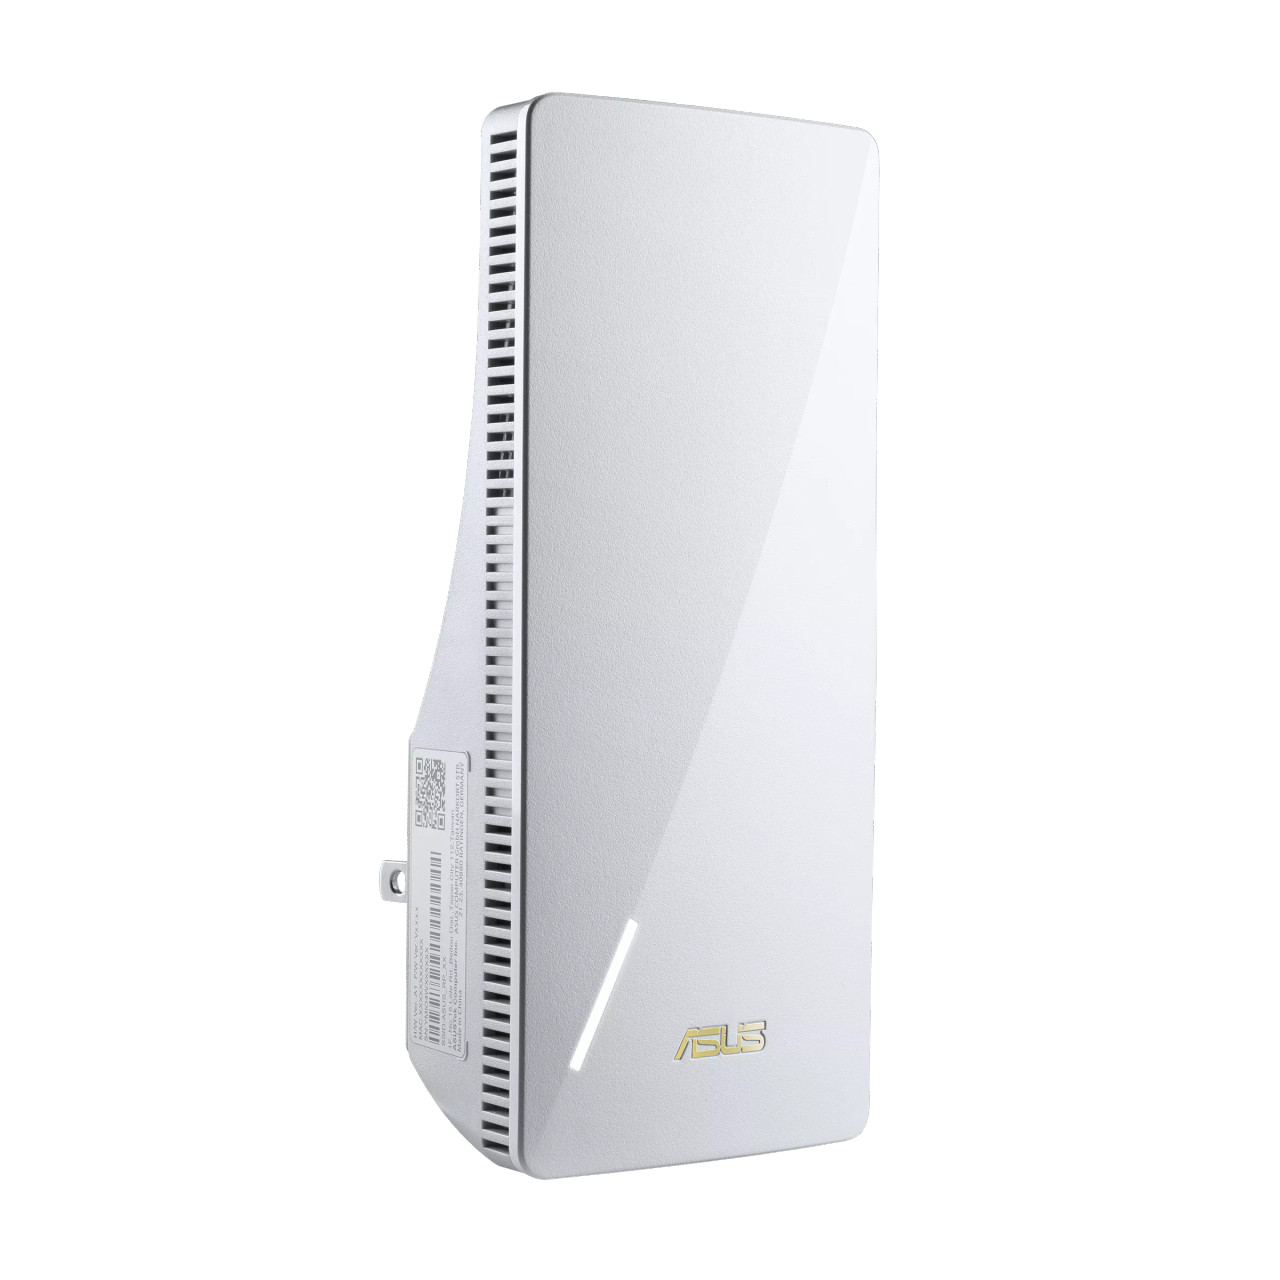 Asus AX3000 Dual-band WiFi 6 (802.11ax) Range Extender/ AiMesh Extender for  seamless mesh WiFi; works with nearly any WiFi router, 90IG07C0-MU0C10, AYOUB COMPUTERS